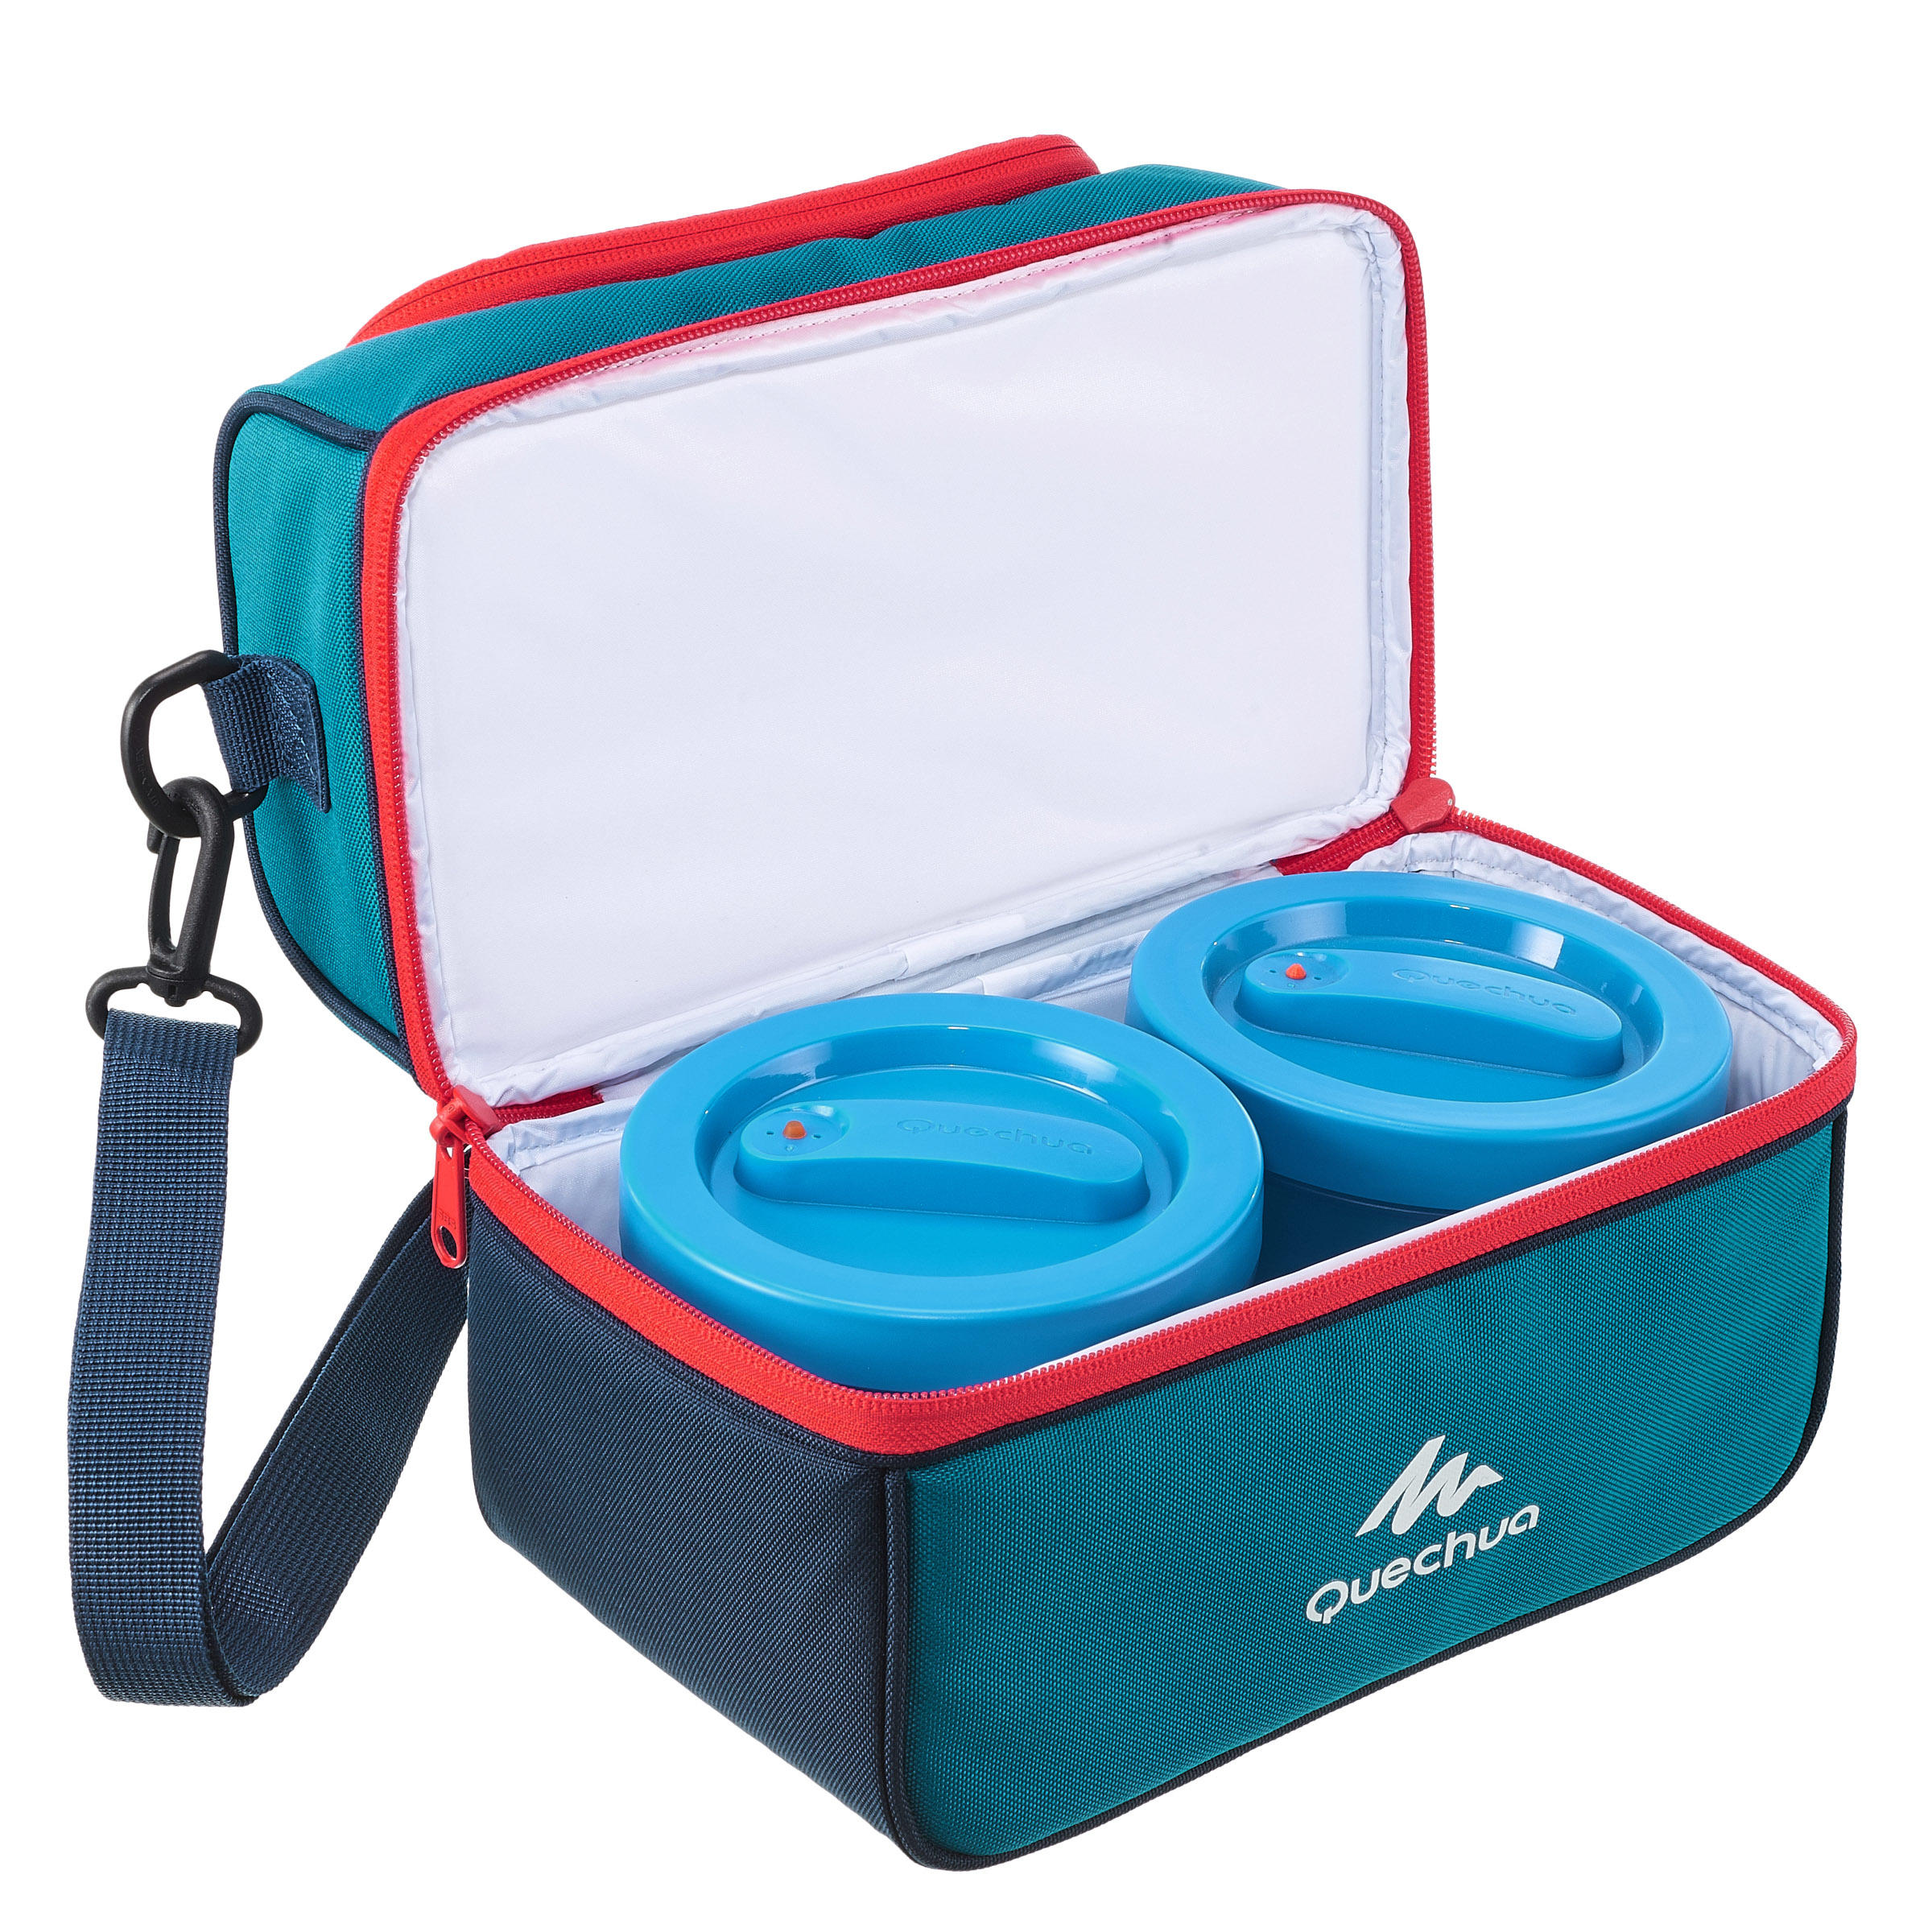 MH500 Hiking Lunch Box Cooler 4.4 